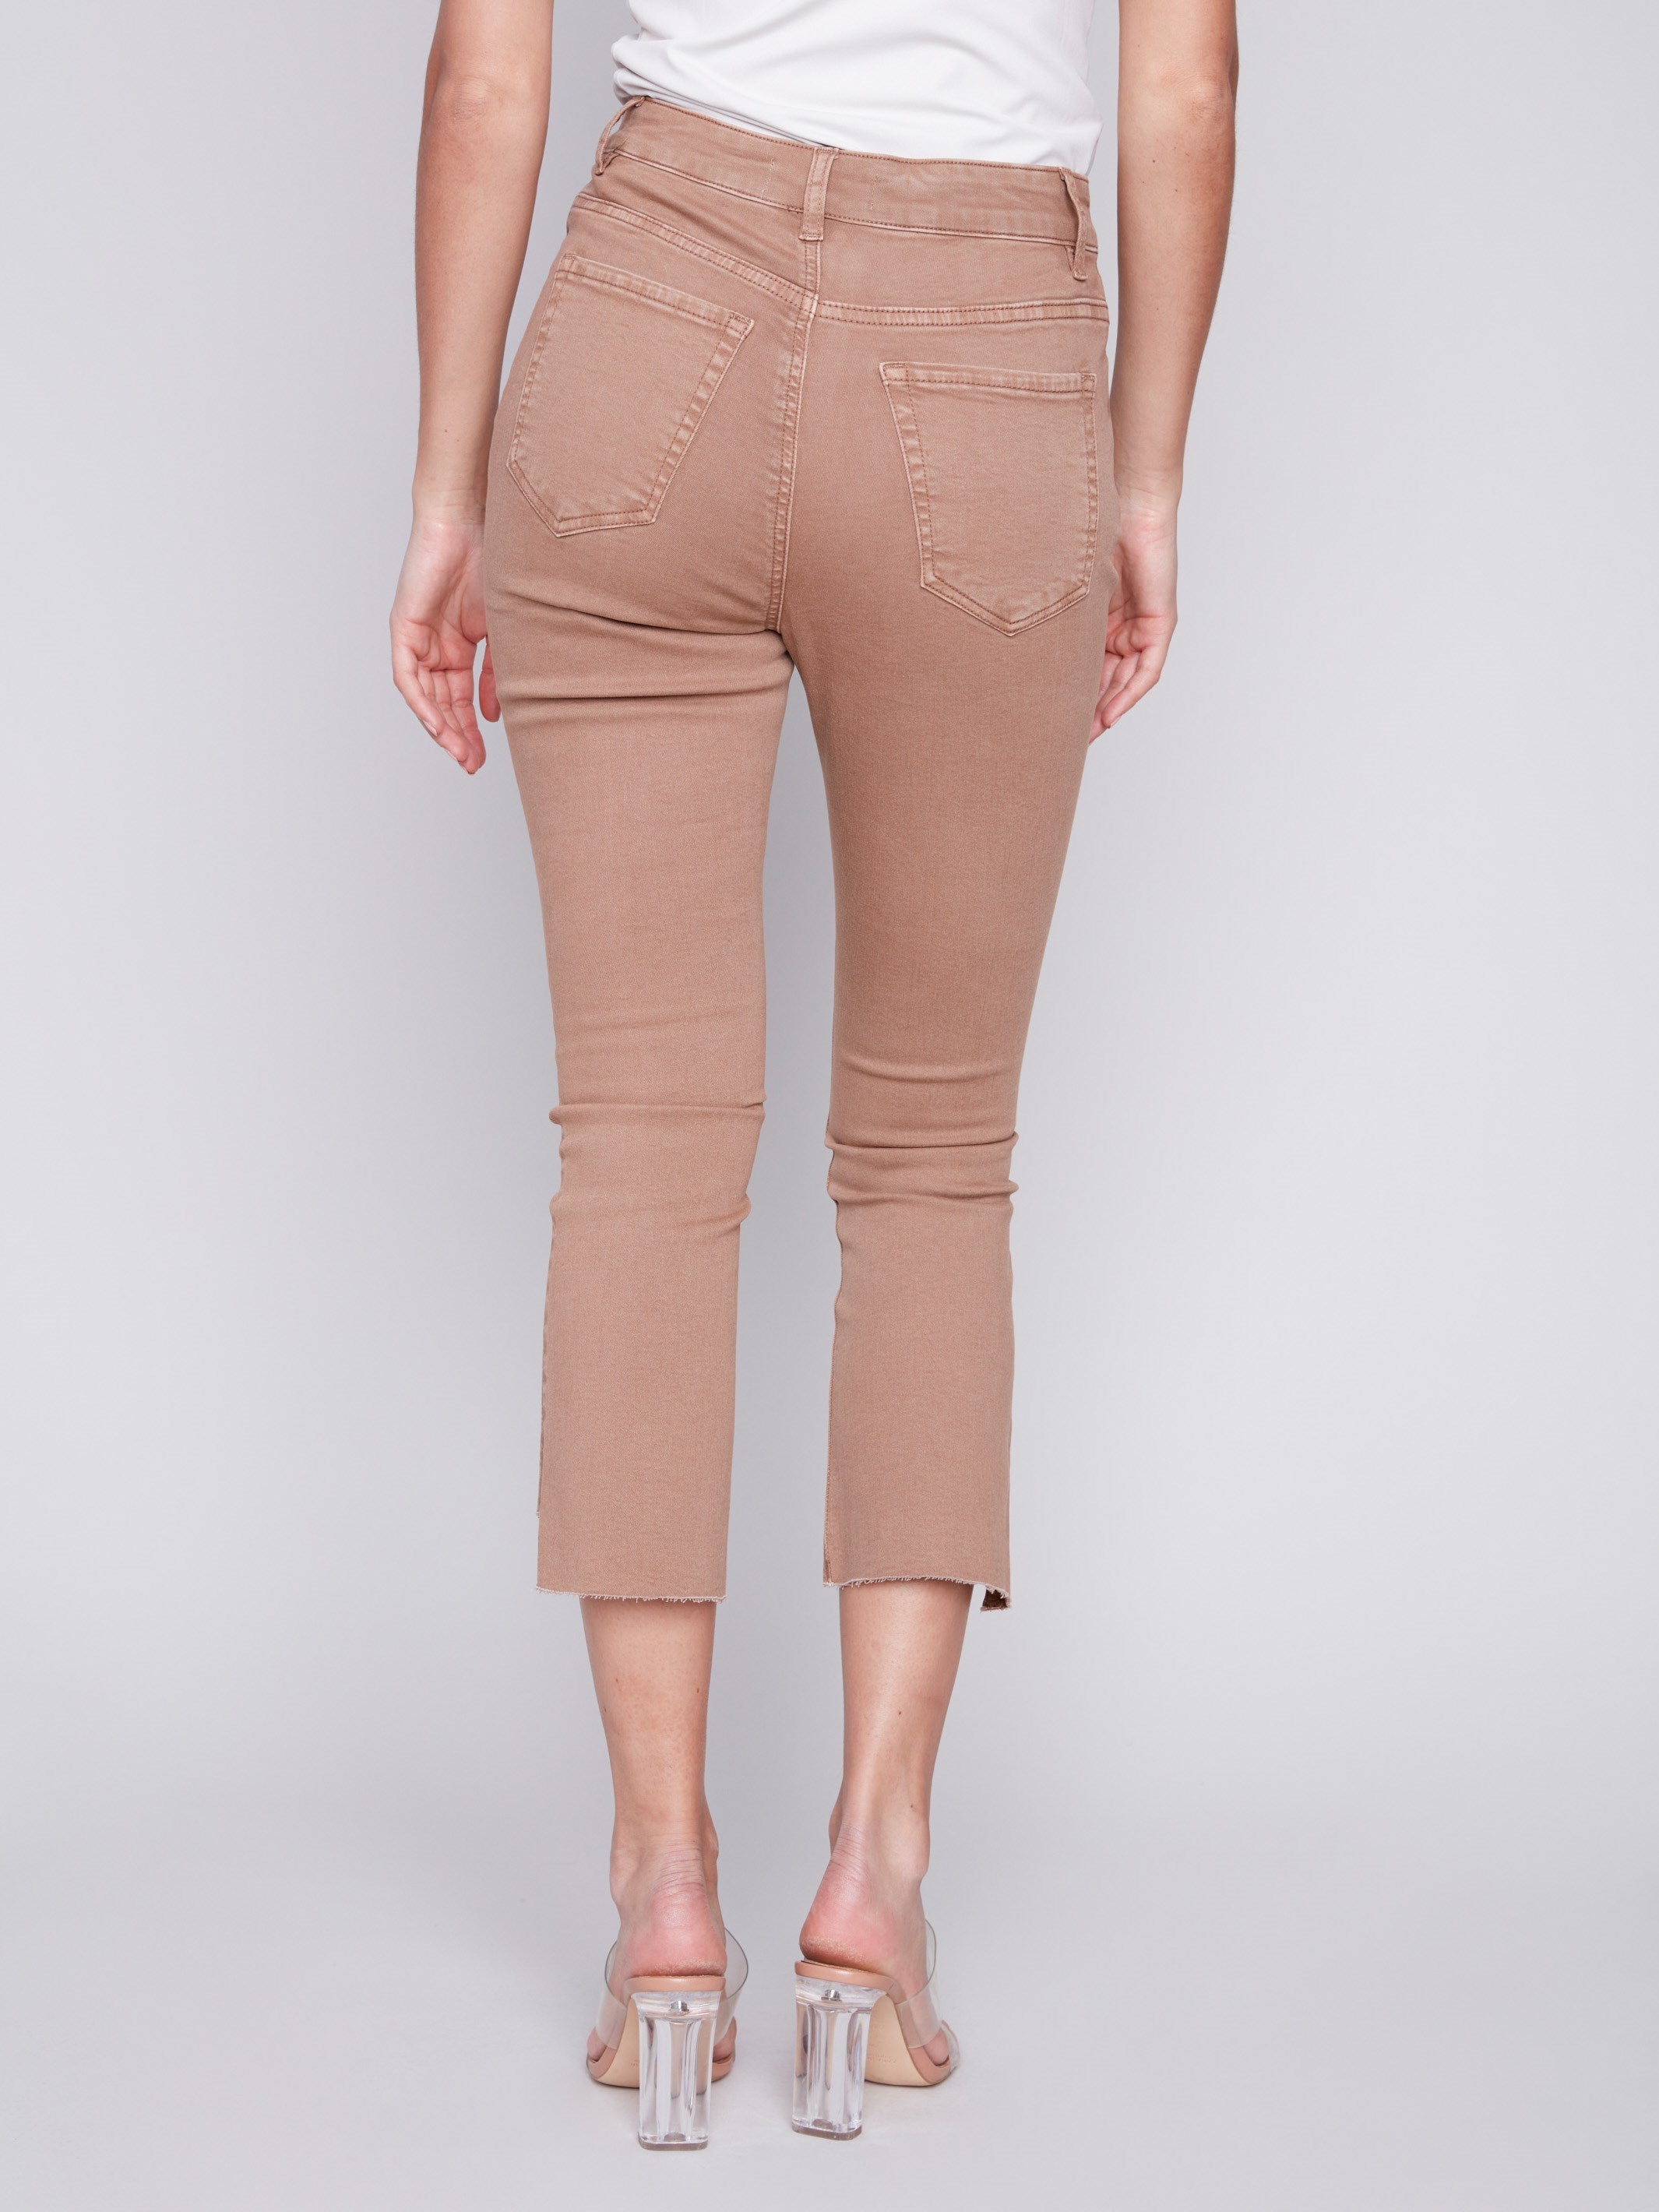 Cropped Bootcut Twill Pants with Asymmetrical Hem - Caramel - Charlie B Collection Canada - Image 3